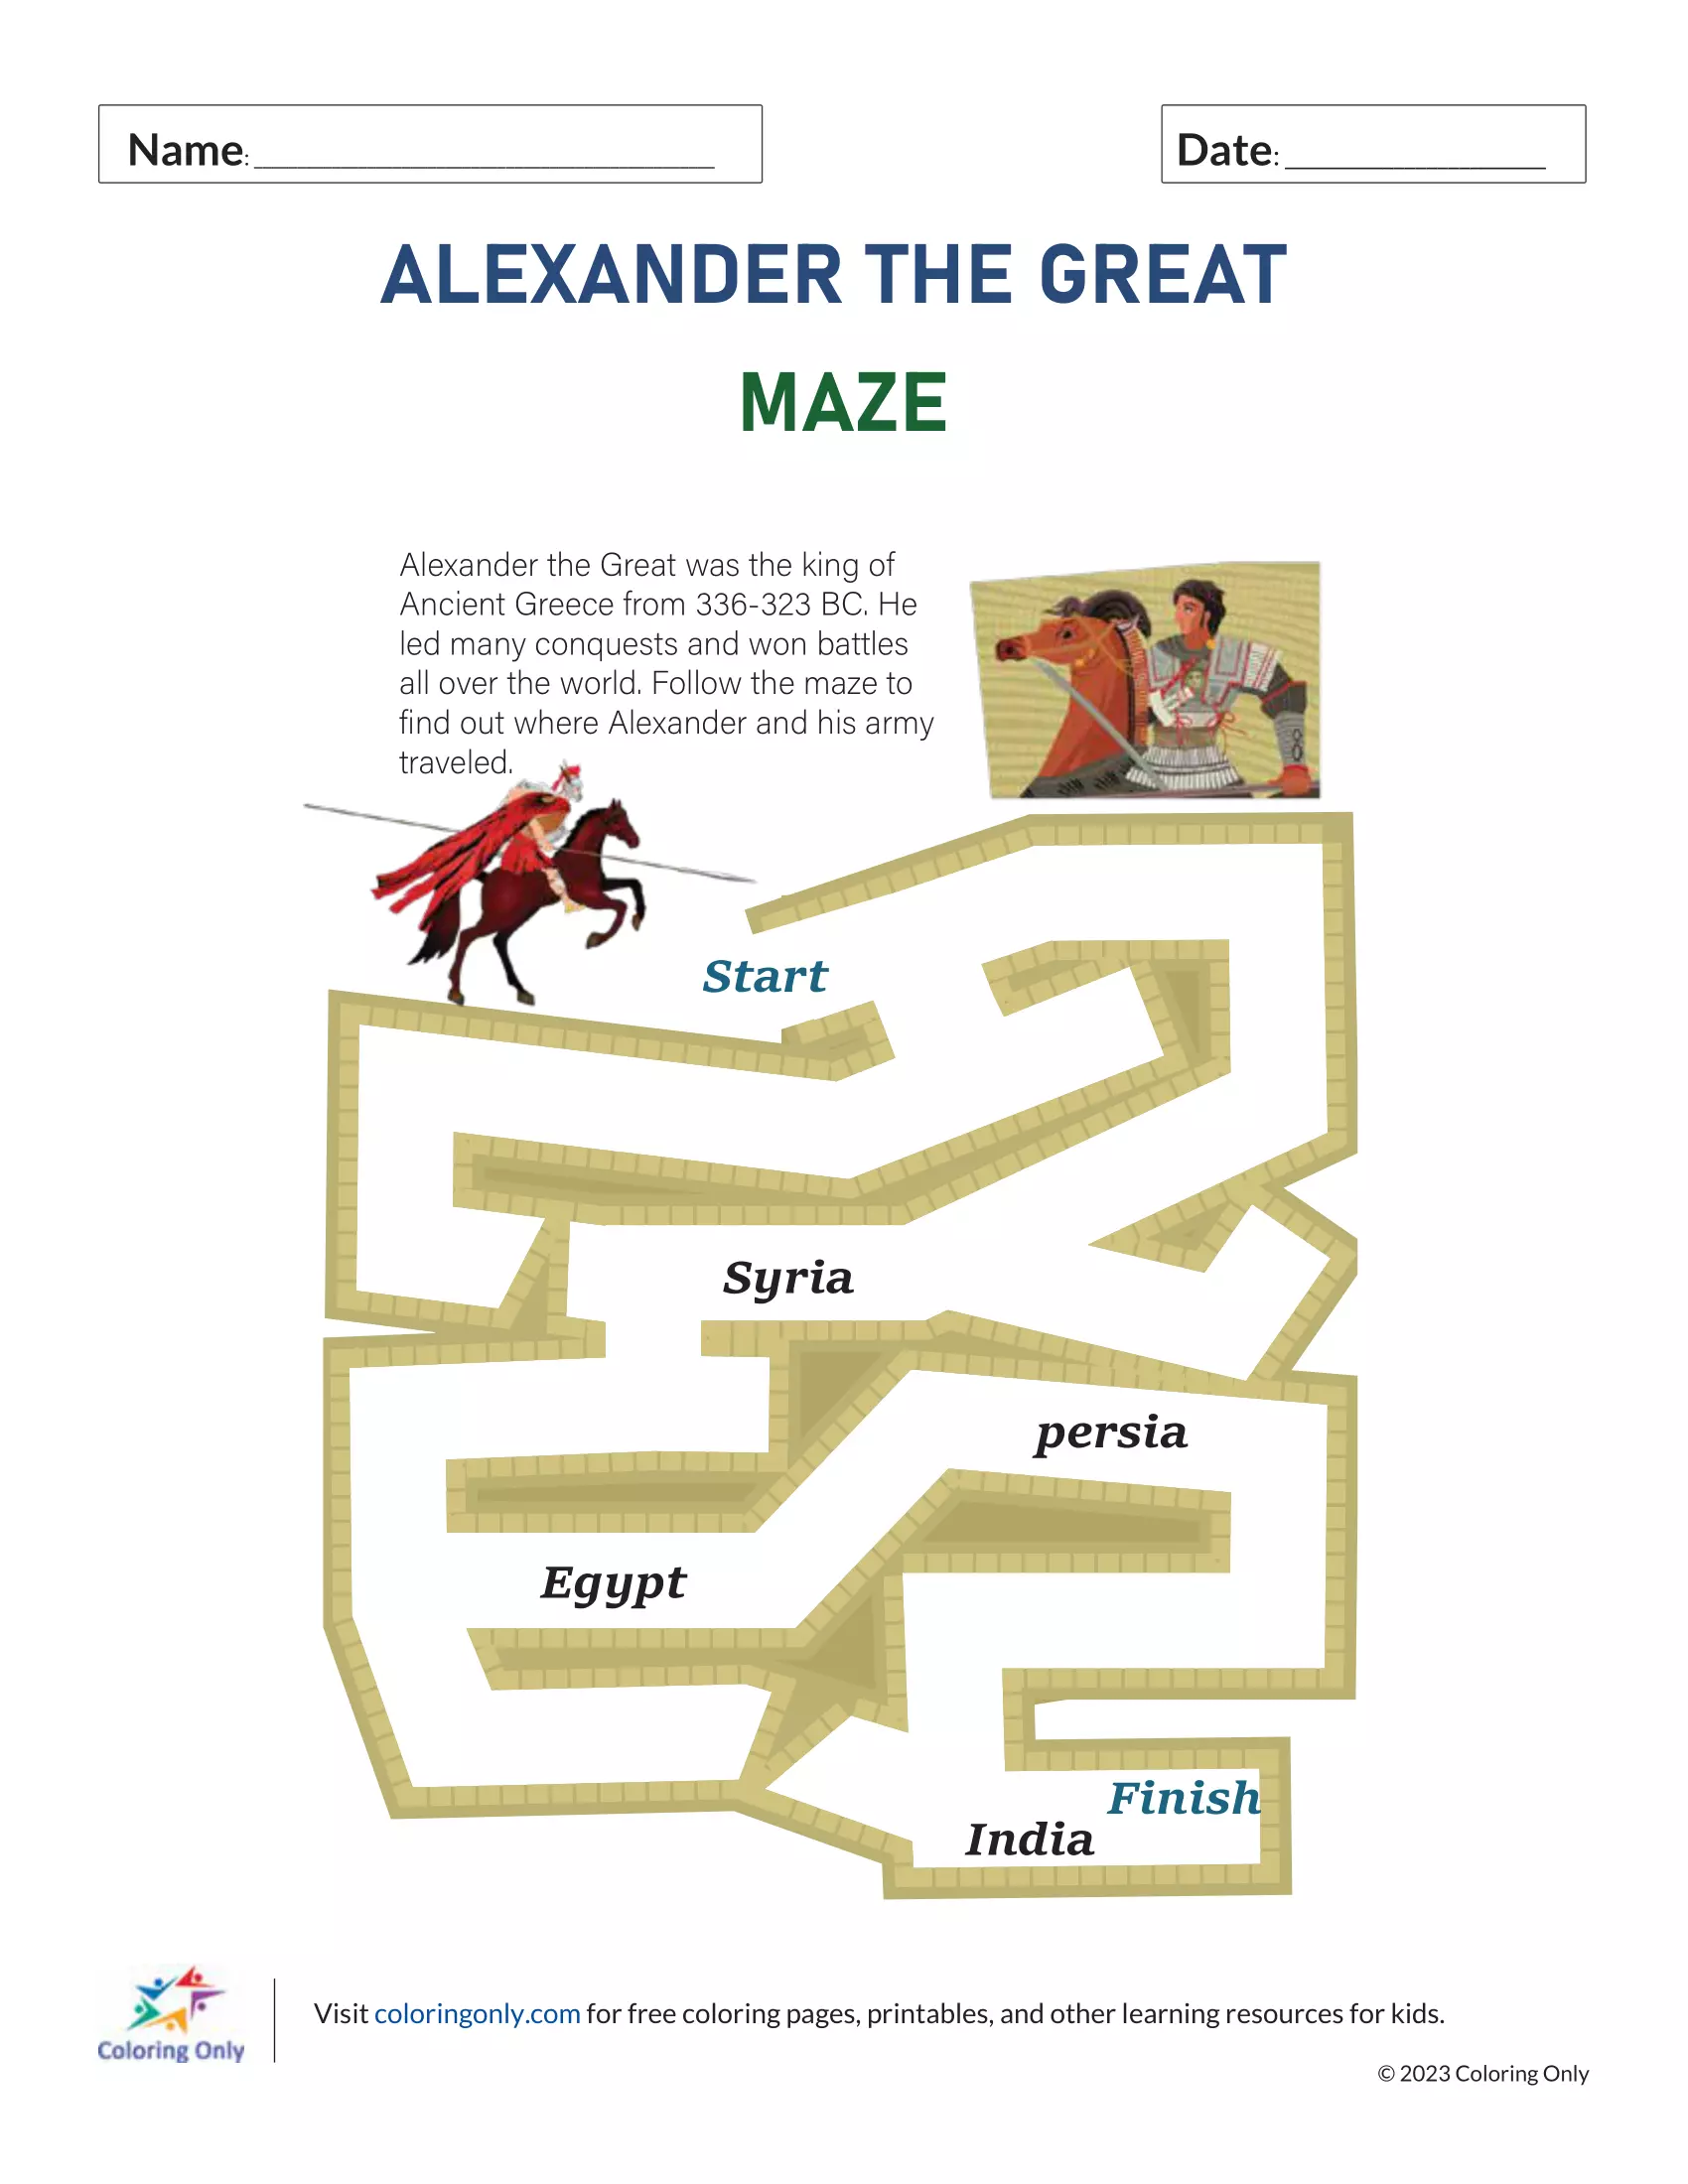 Alexander the Great Maze Free Printable Game